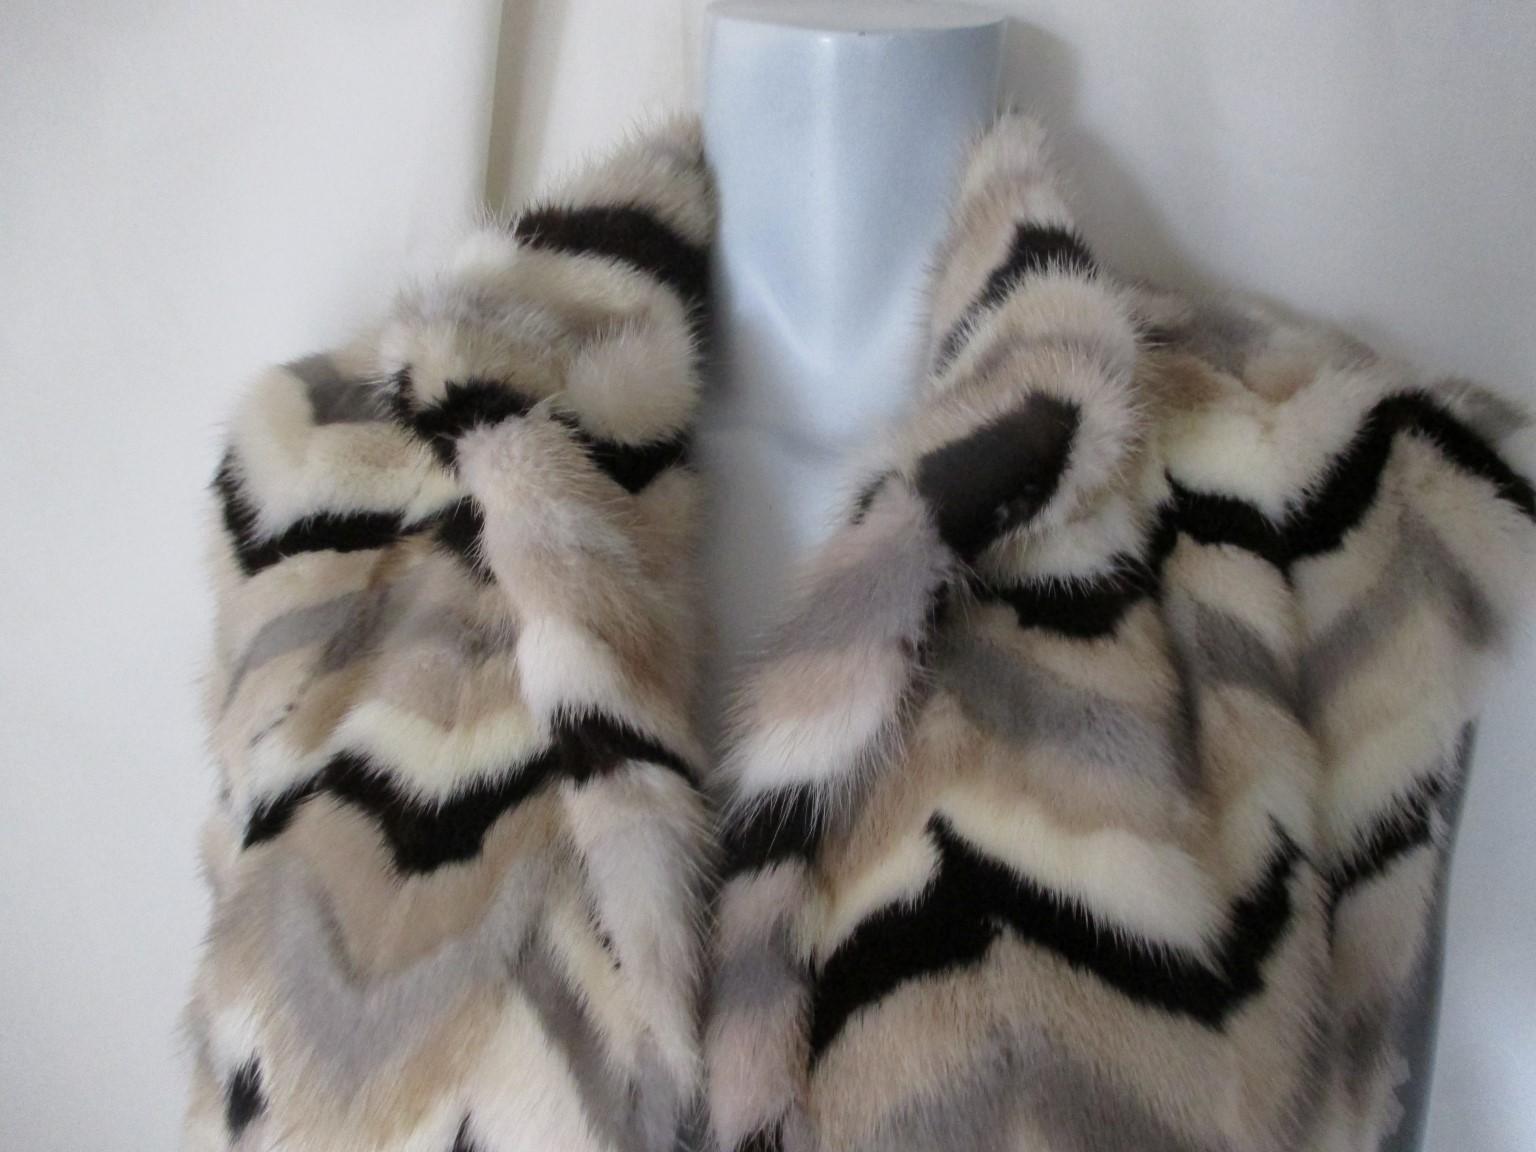 This mink vest has 2 pockets, no closure buttons
Its in good vintage condition 
Color: grey, black, brown, creme
Size fits as medium

Please note that vintage items are not new and therefore might have minor imperfections.
